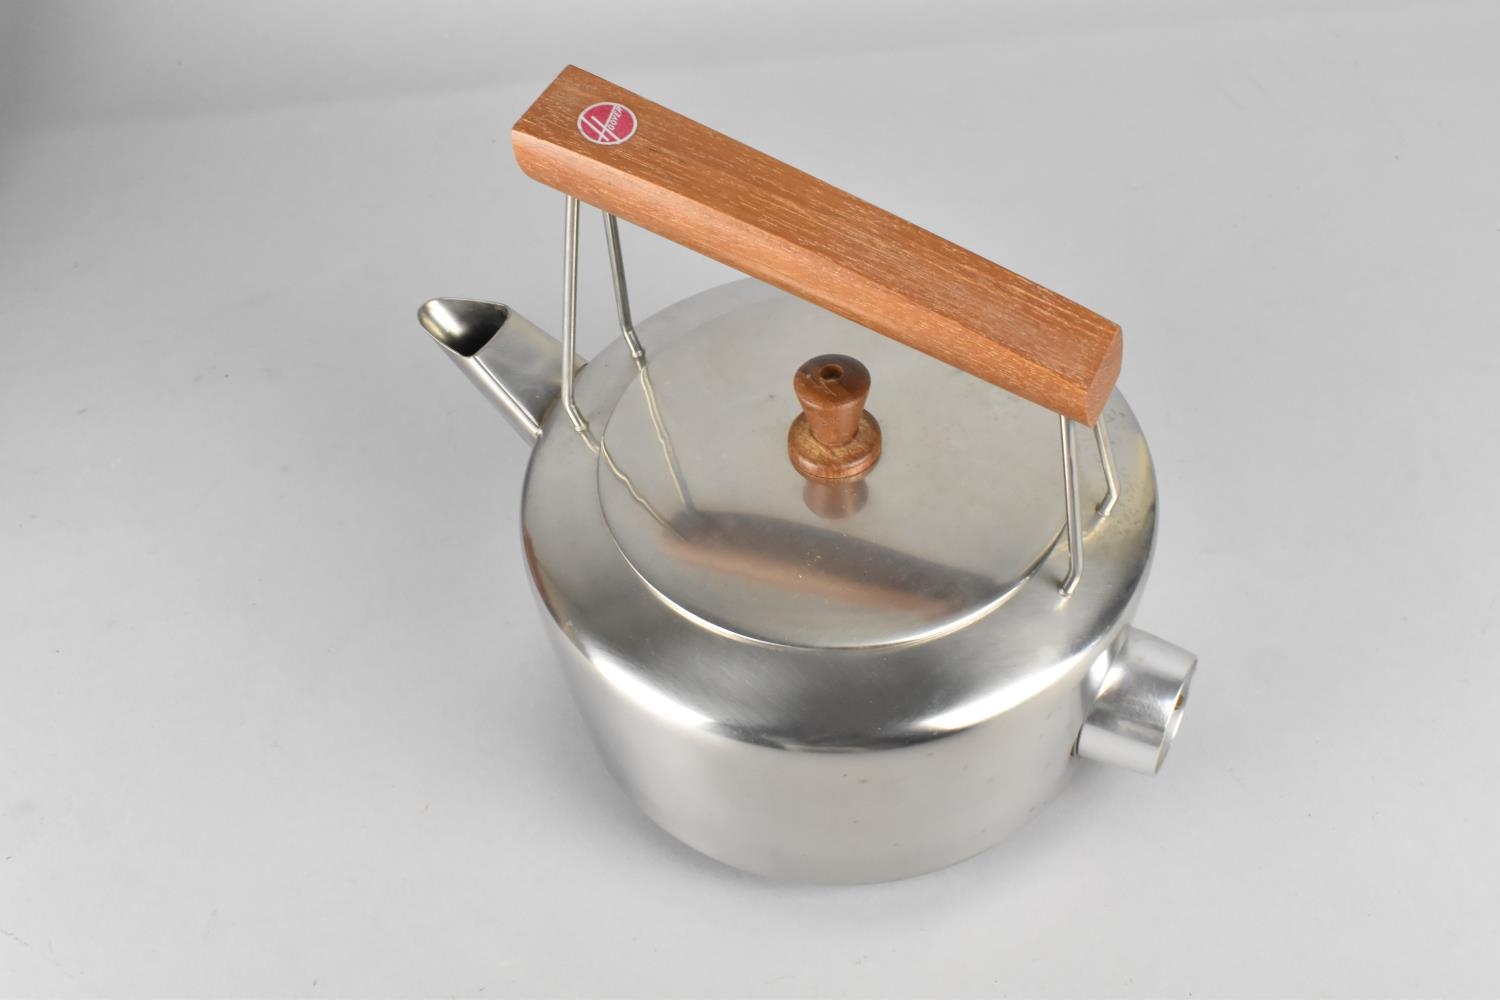 A c.1970s Stainless Steel Electric Kettle by Hoover, Model 6204, with Box - Image 3 of 4